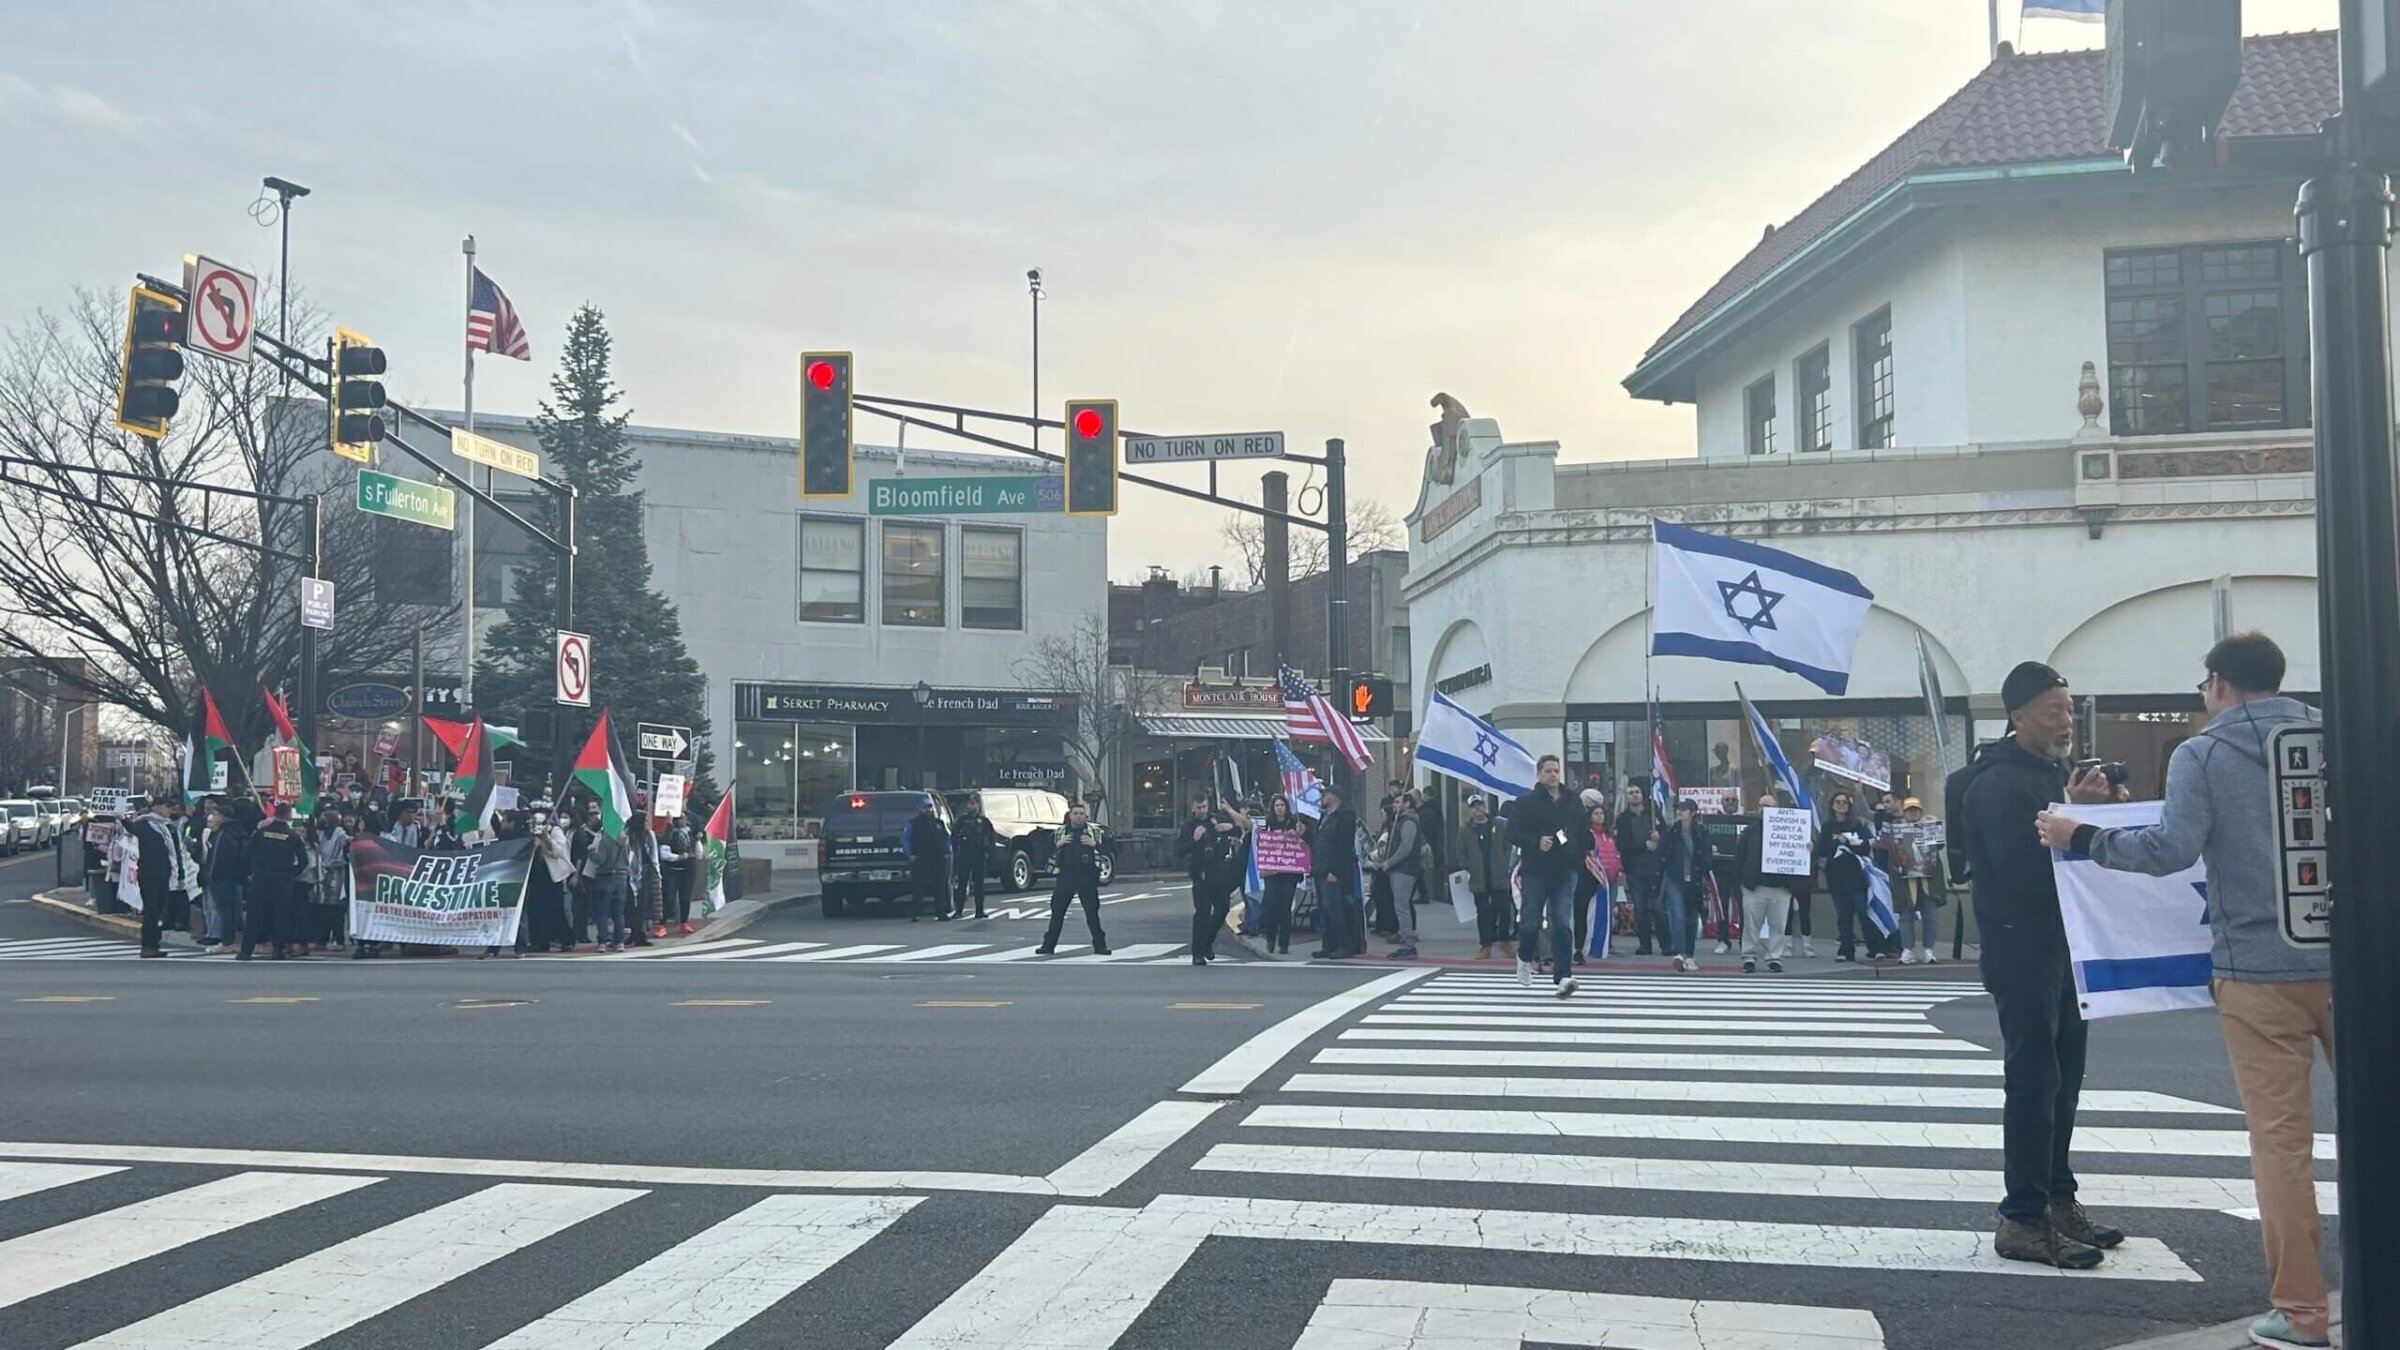 With police forces in between, pro-Palestinian and pro-Israeli protesters stand across the street from one another in Montclair, New Jersey.